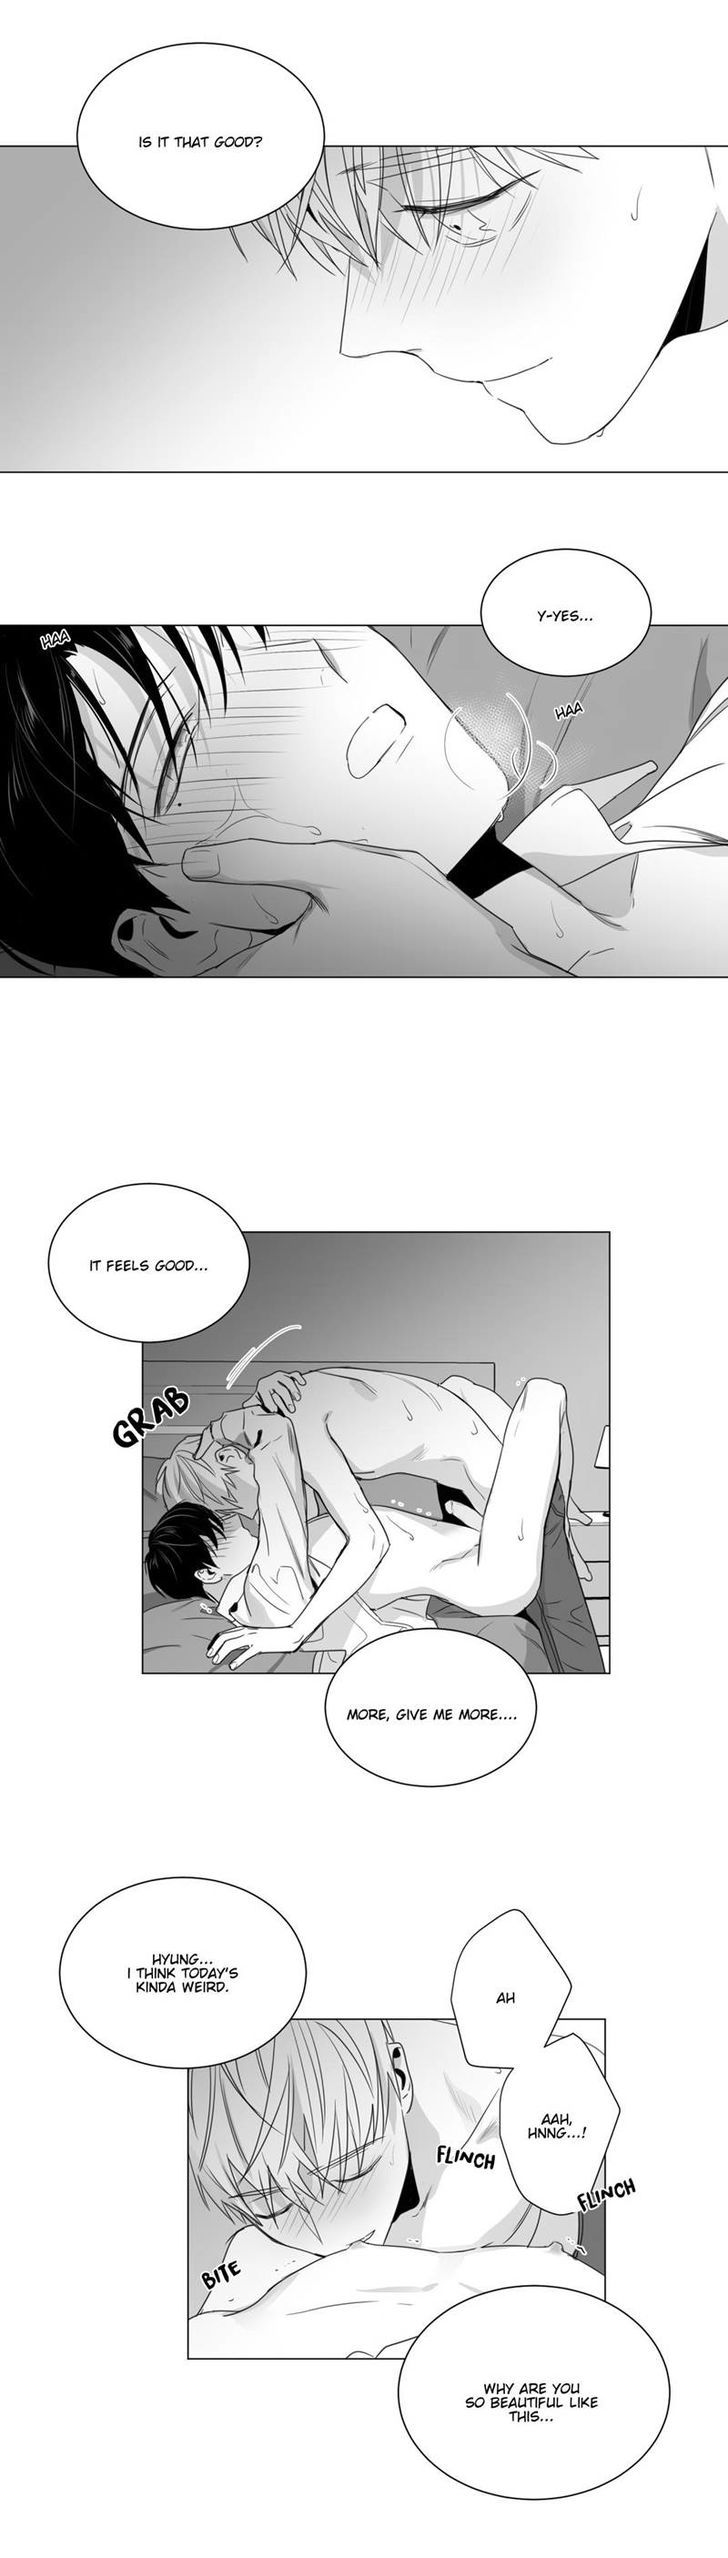 Lover Boy (Lezhin) Chapter 029 page 17